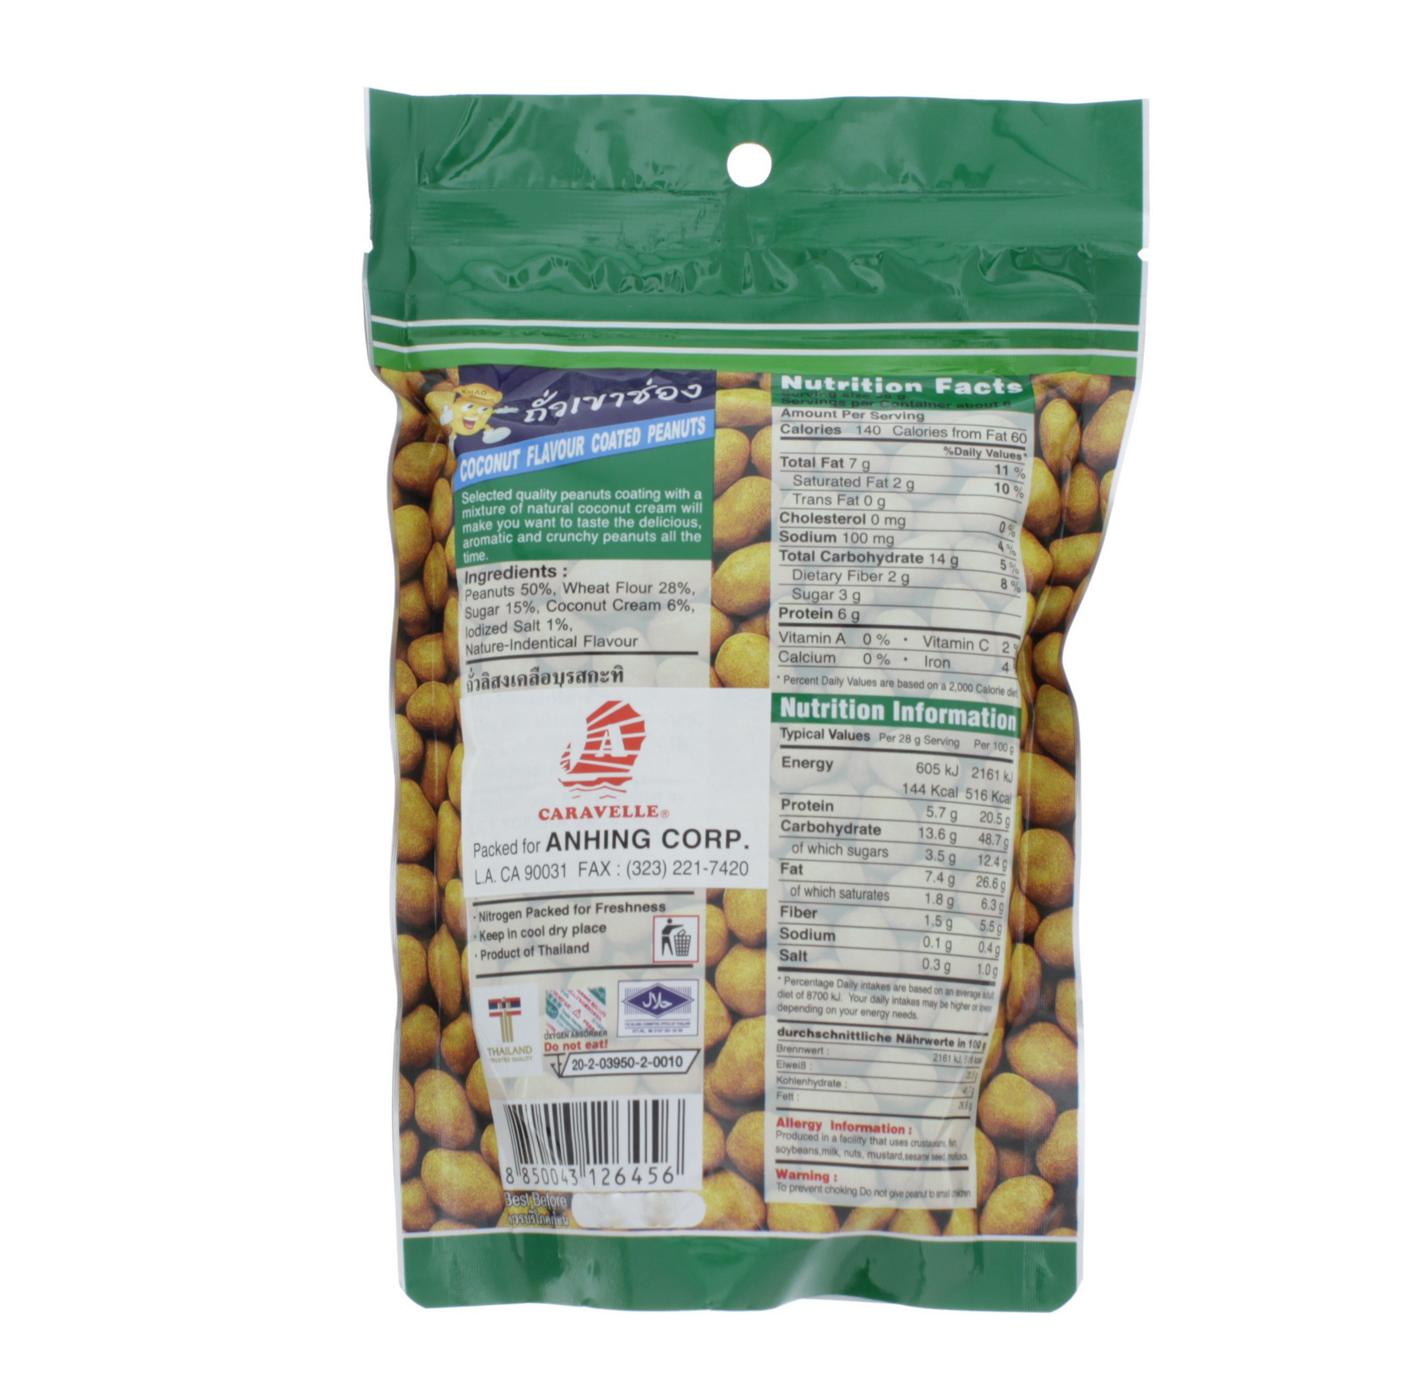 Khao Shong Coconut Flavour Coated Peanuts; image 2 of 2